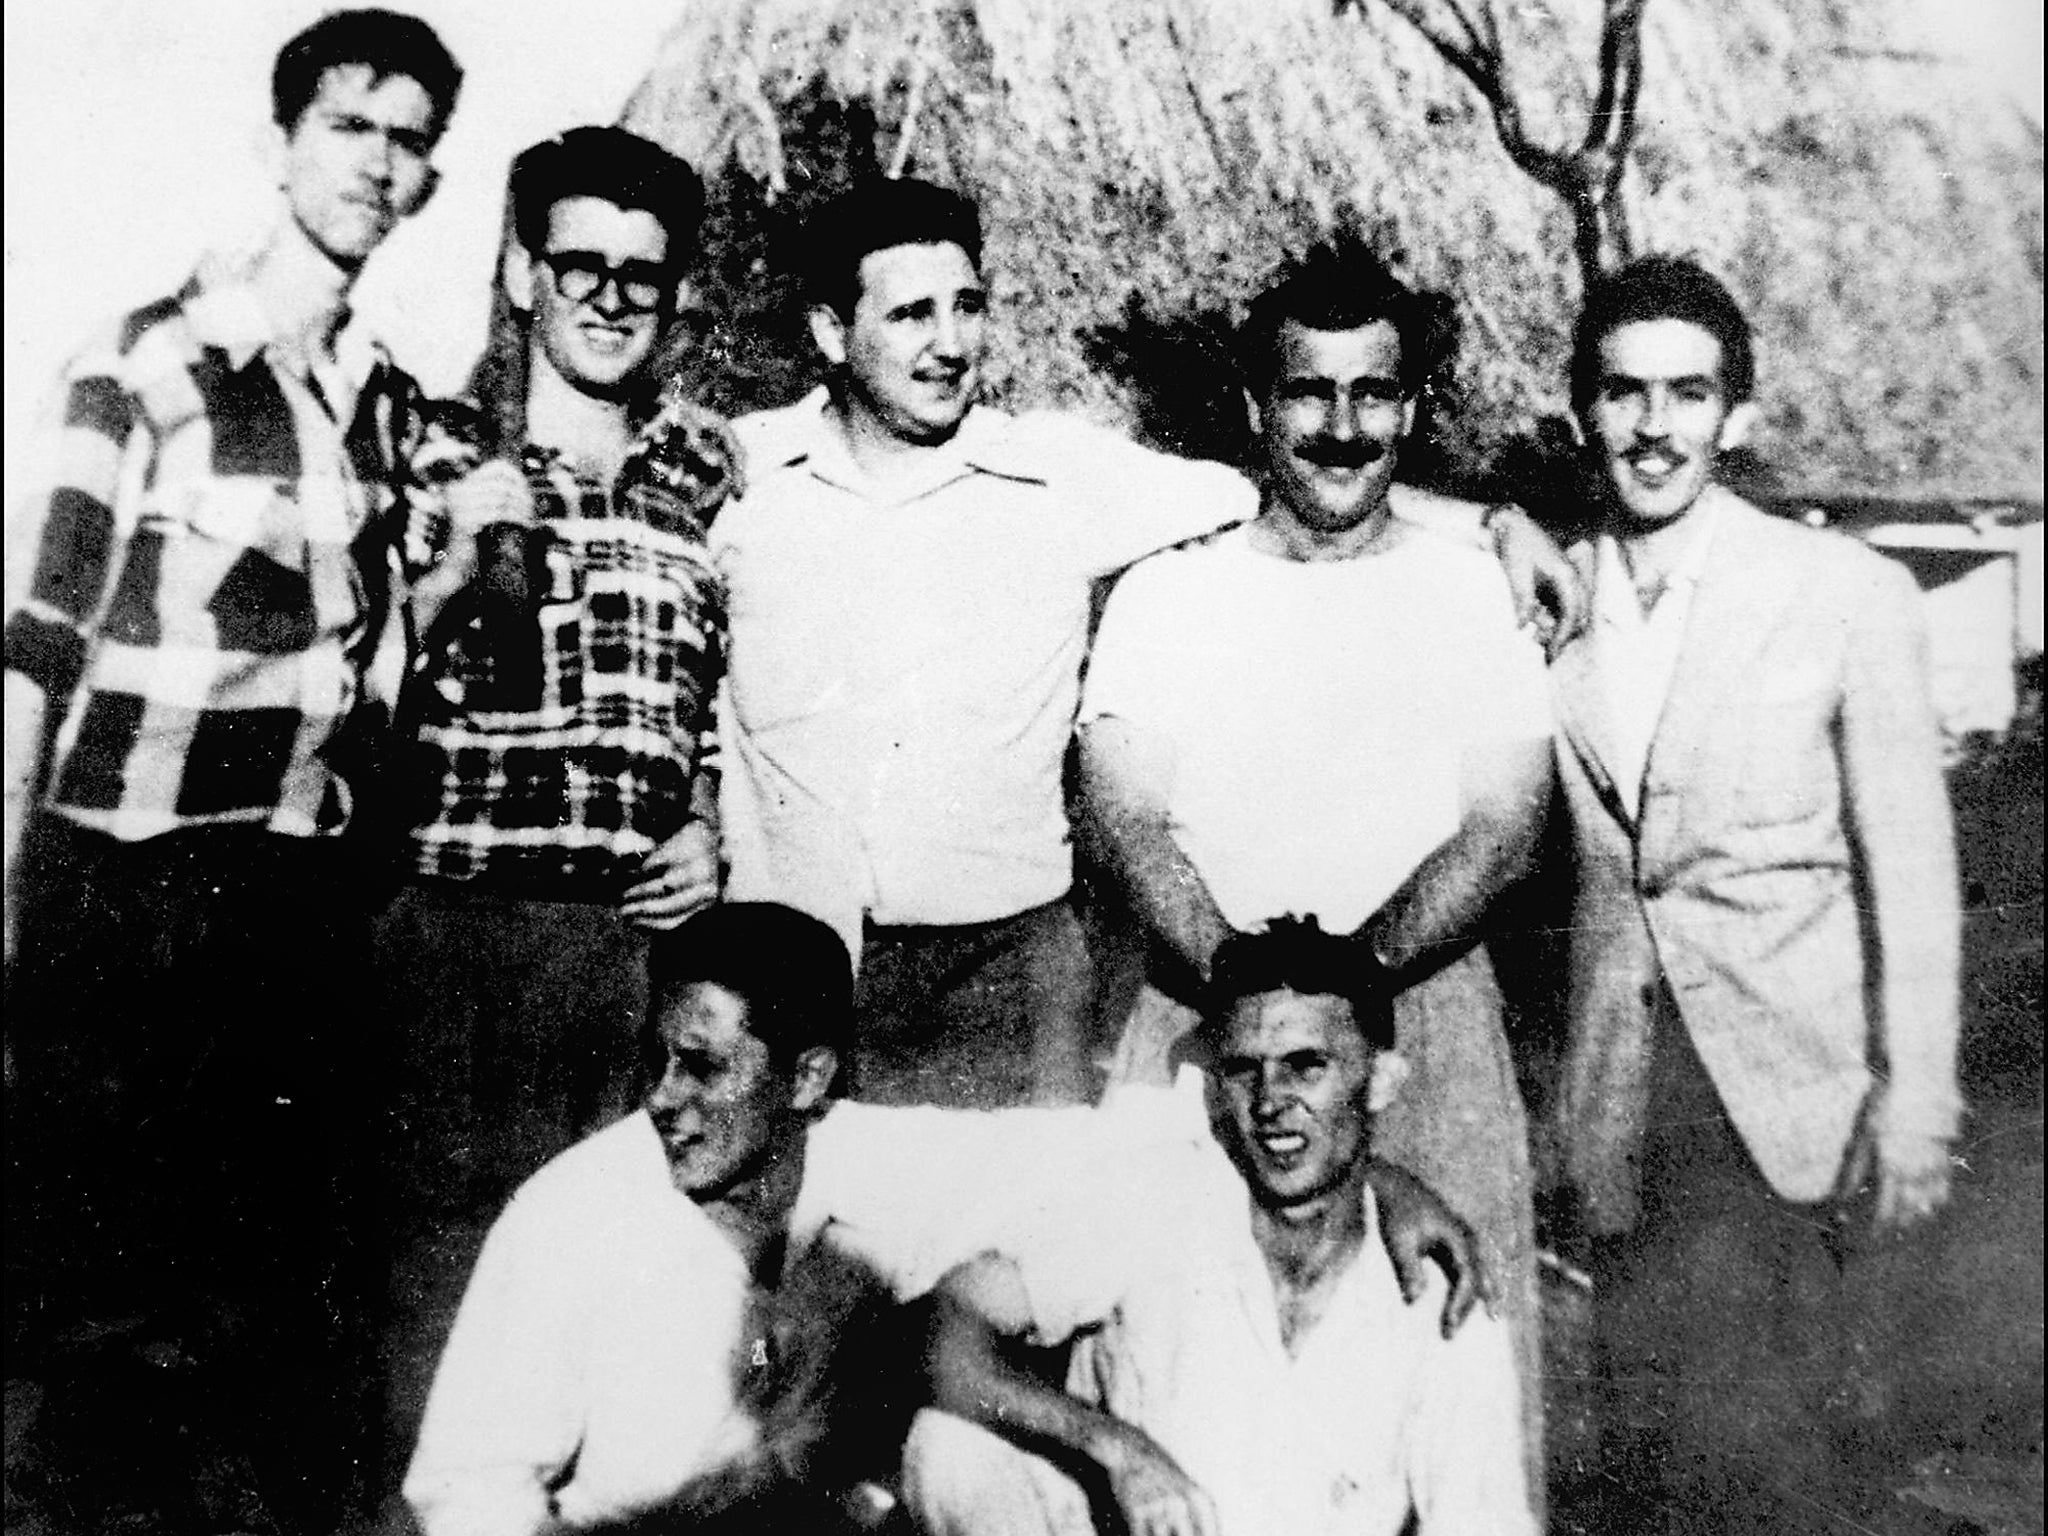 Guerrilla leader Castro (front right) with a group of comrades in Los Palos, Havana province, during the preparation of the attack on the Moncada Garrison